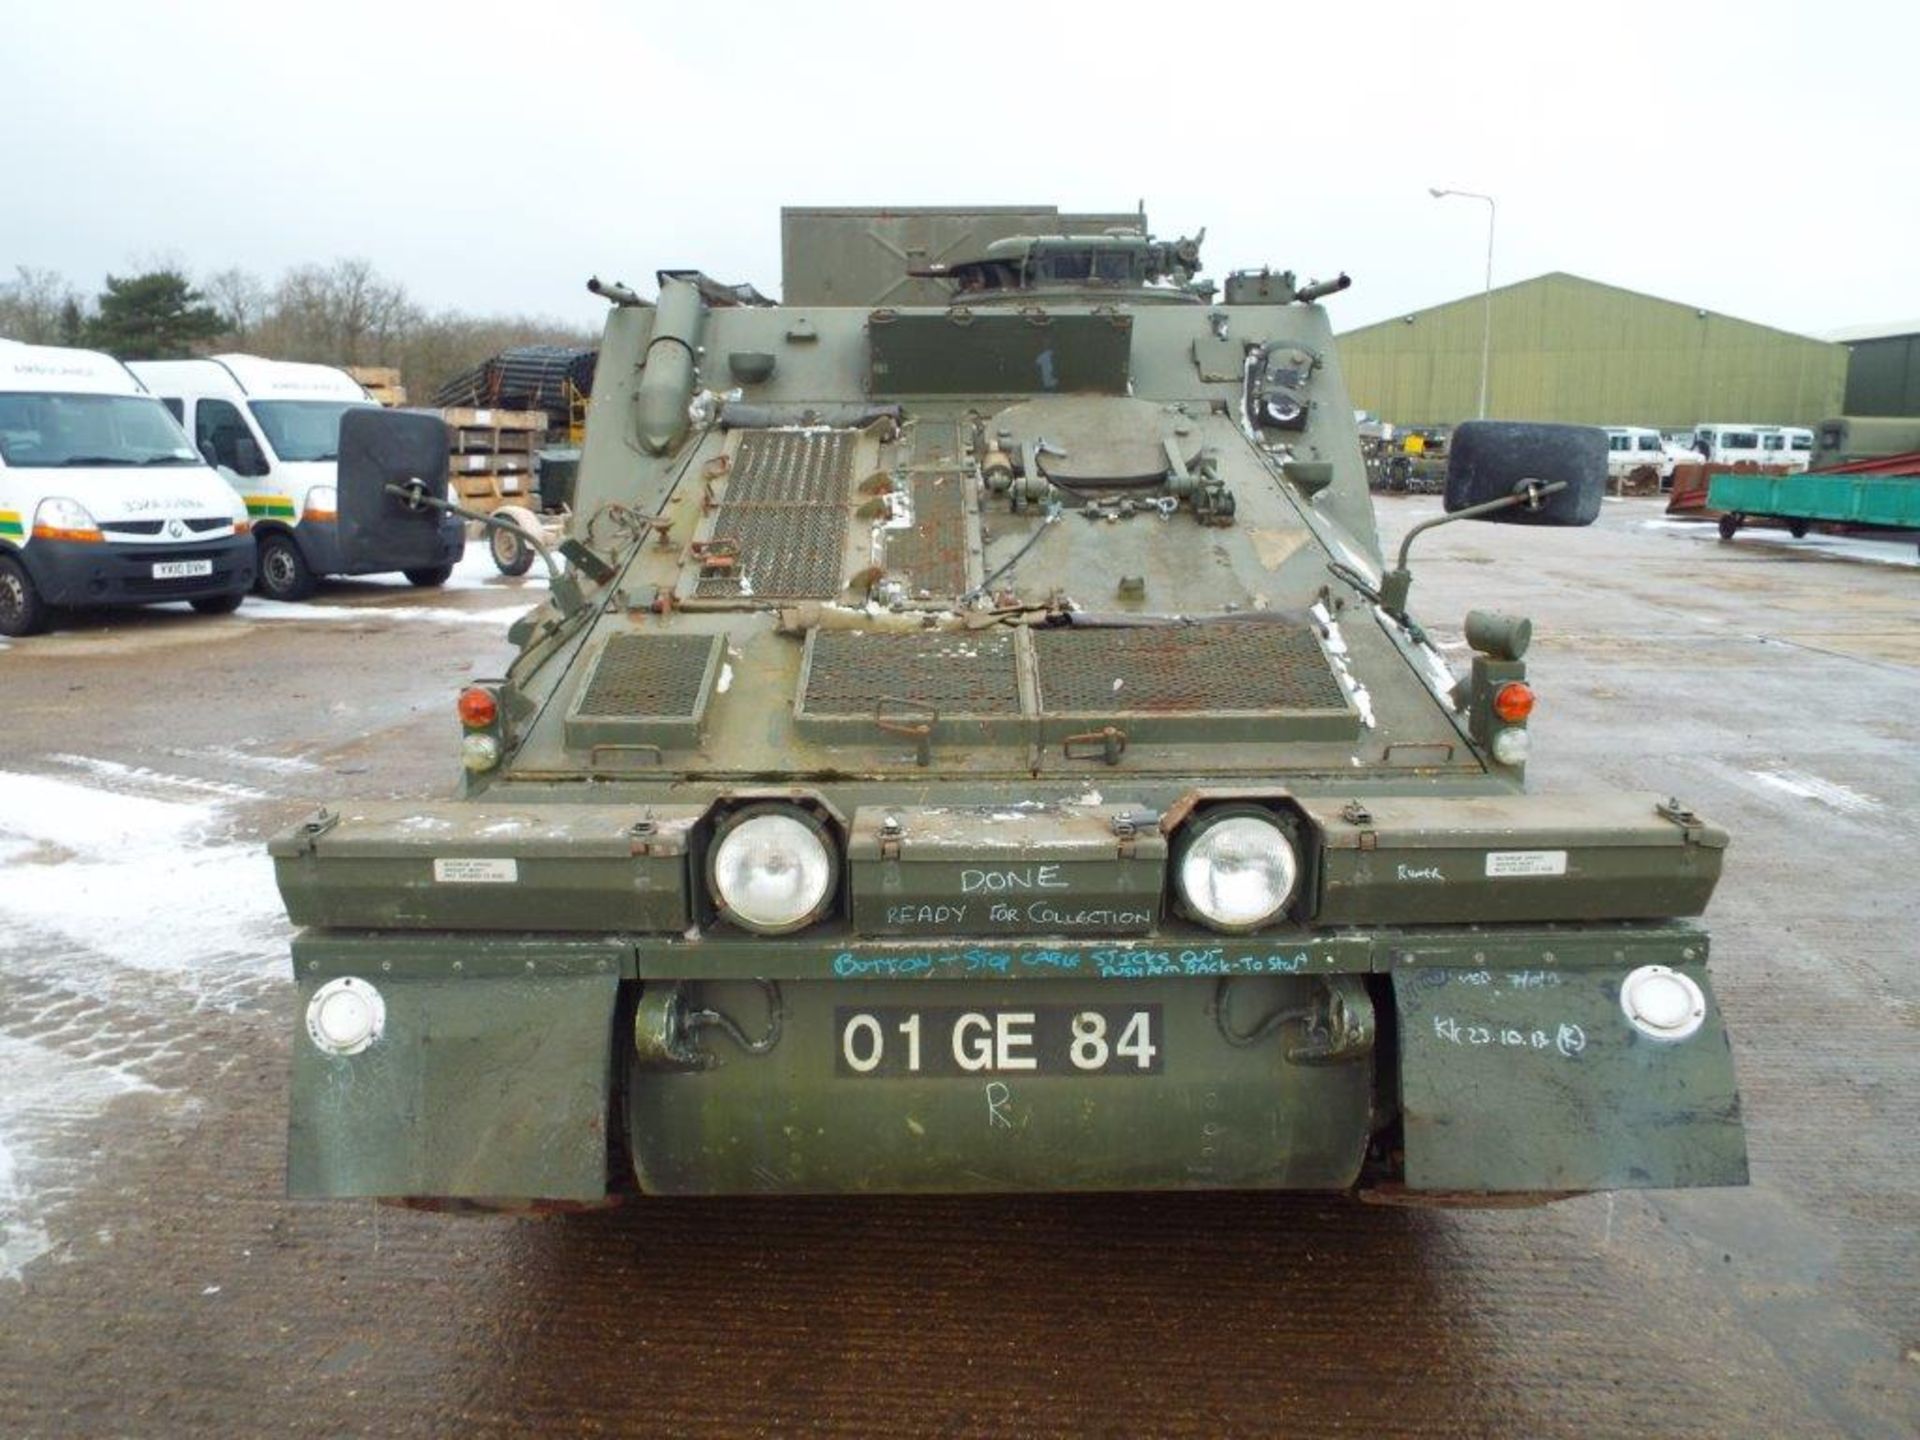 Dieselised CVRT FV105 Sultan Armoured Personnel Carrier with David Brown TN15e Gearbox - Image 2 of 26